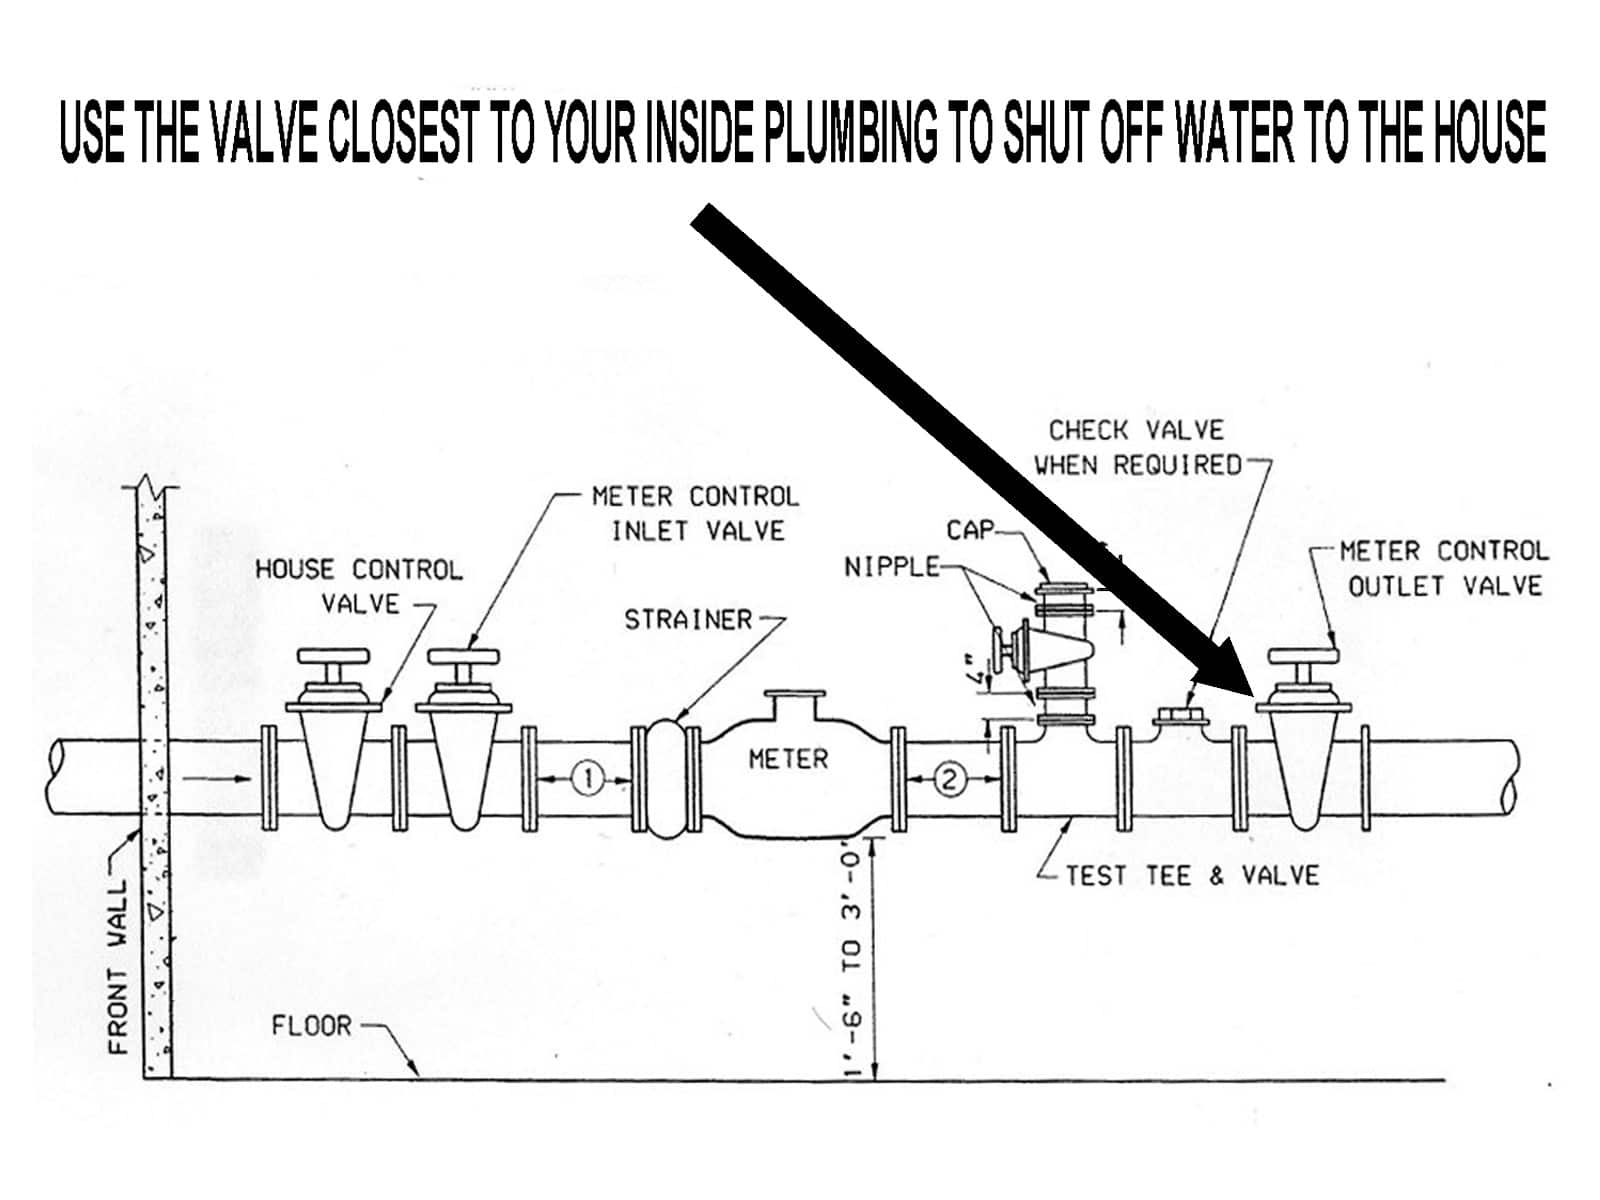 How to shut off water to a house using a water meter valve.